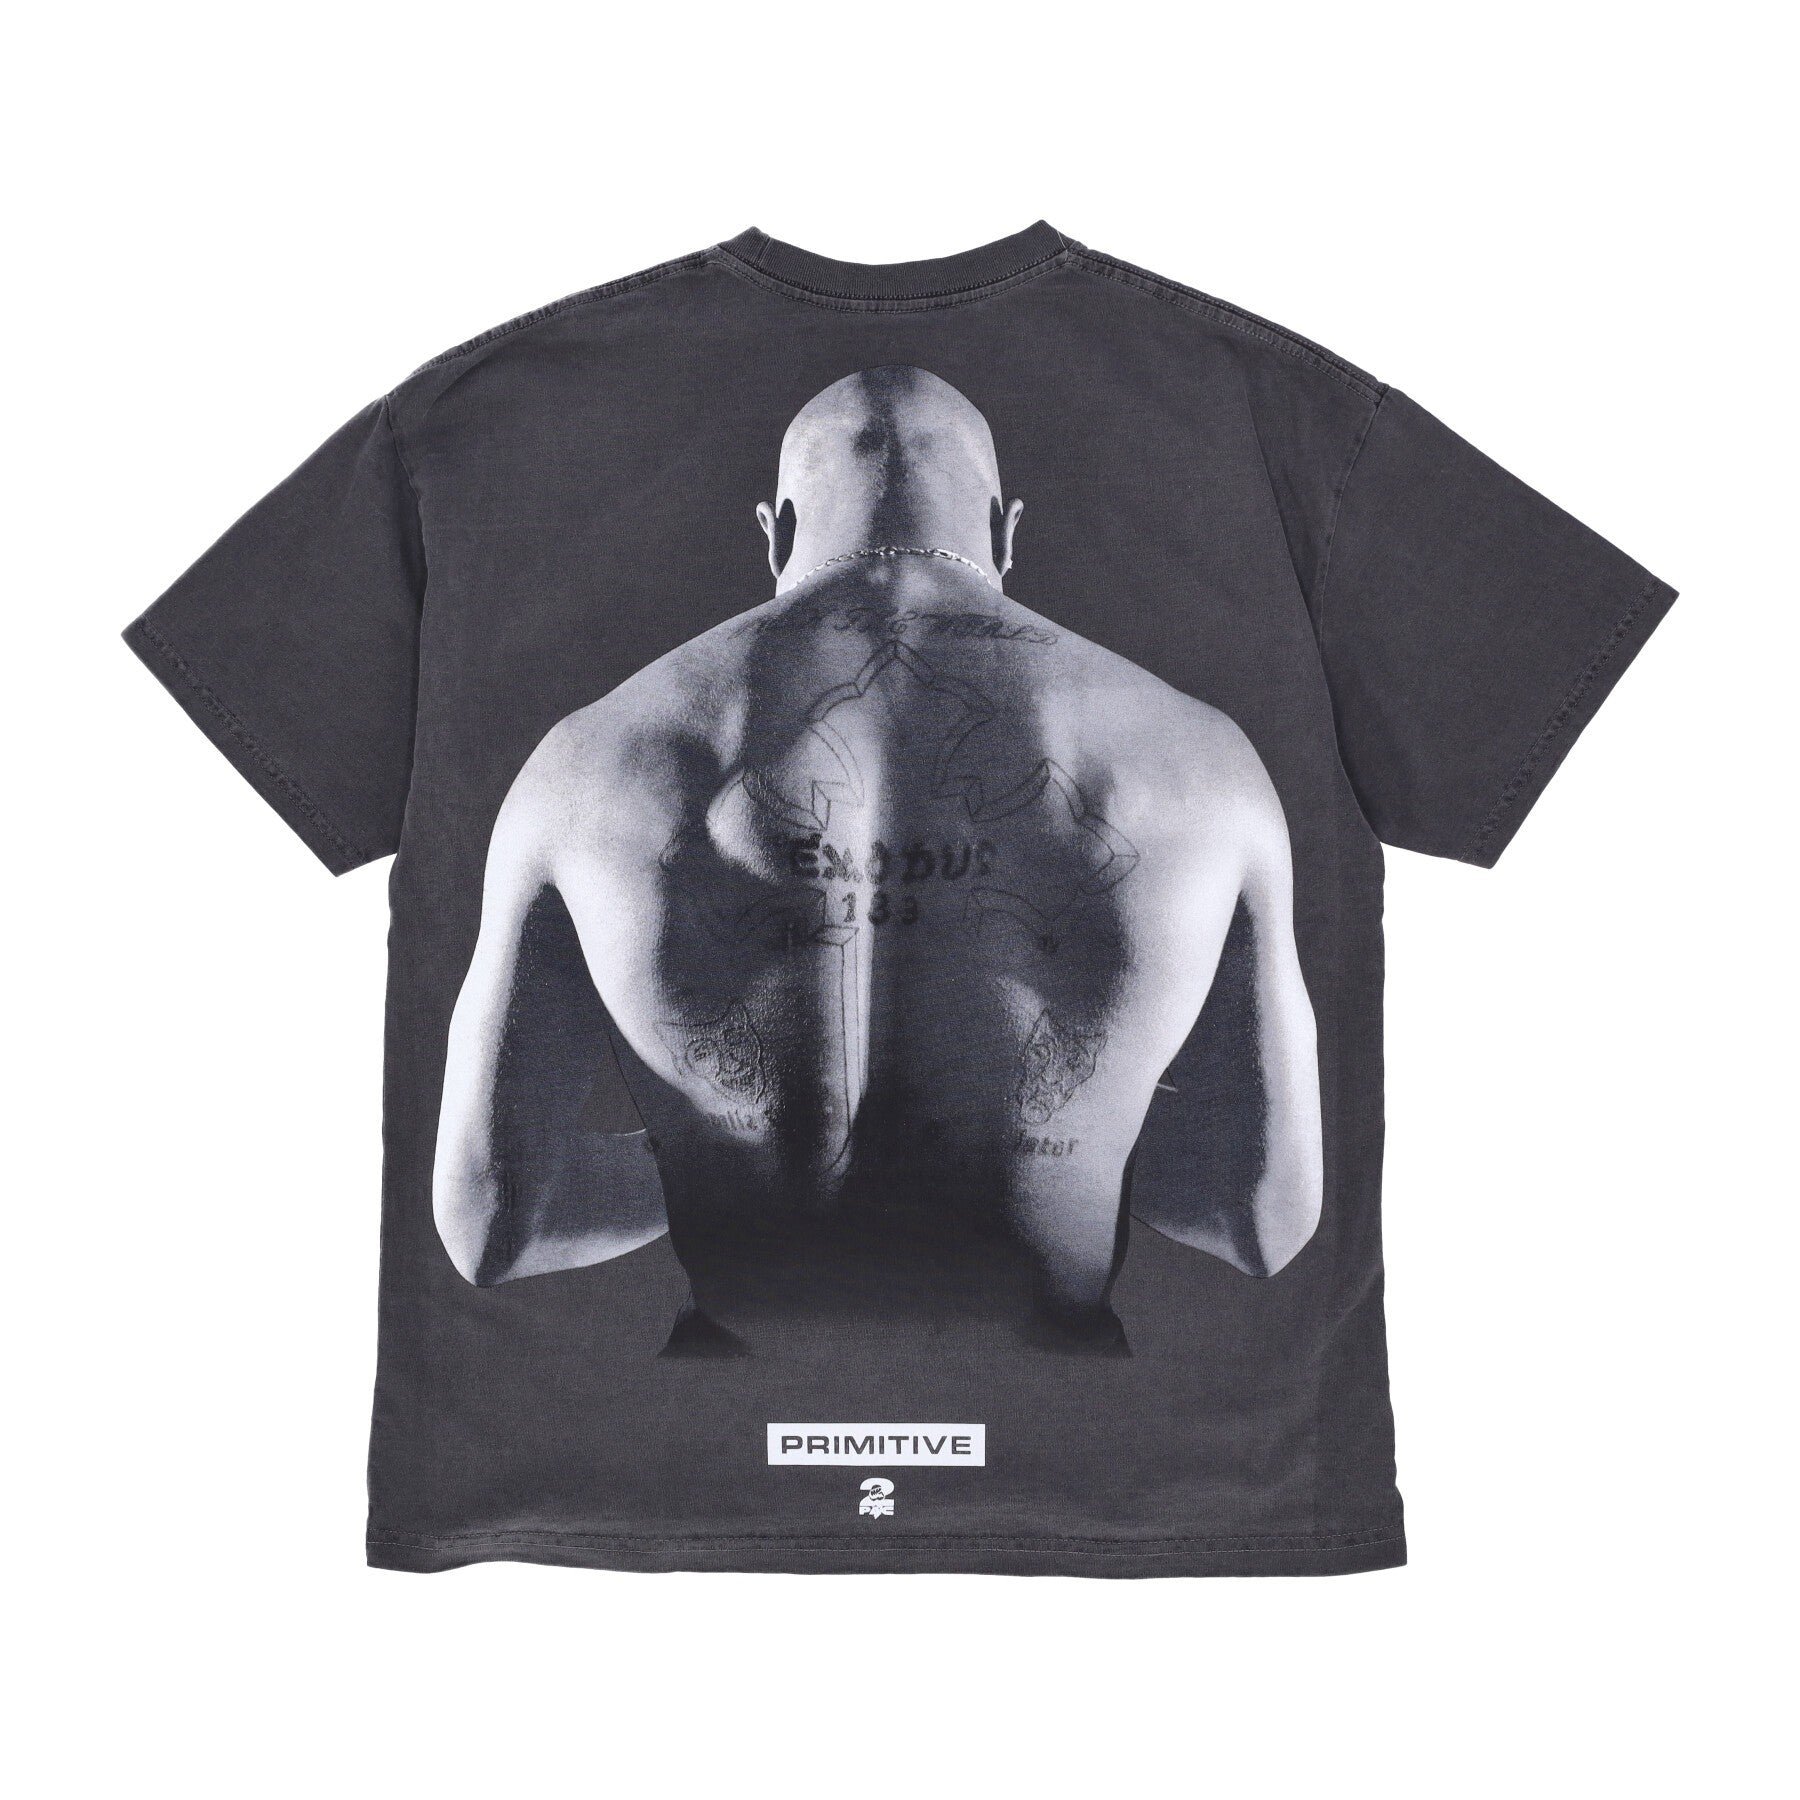 Forever Washed Tee X 2pac Black Men's T-Shirt